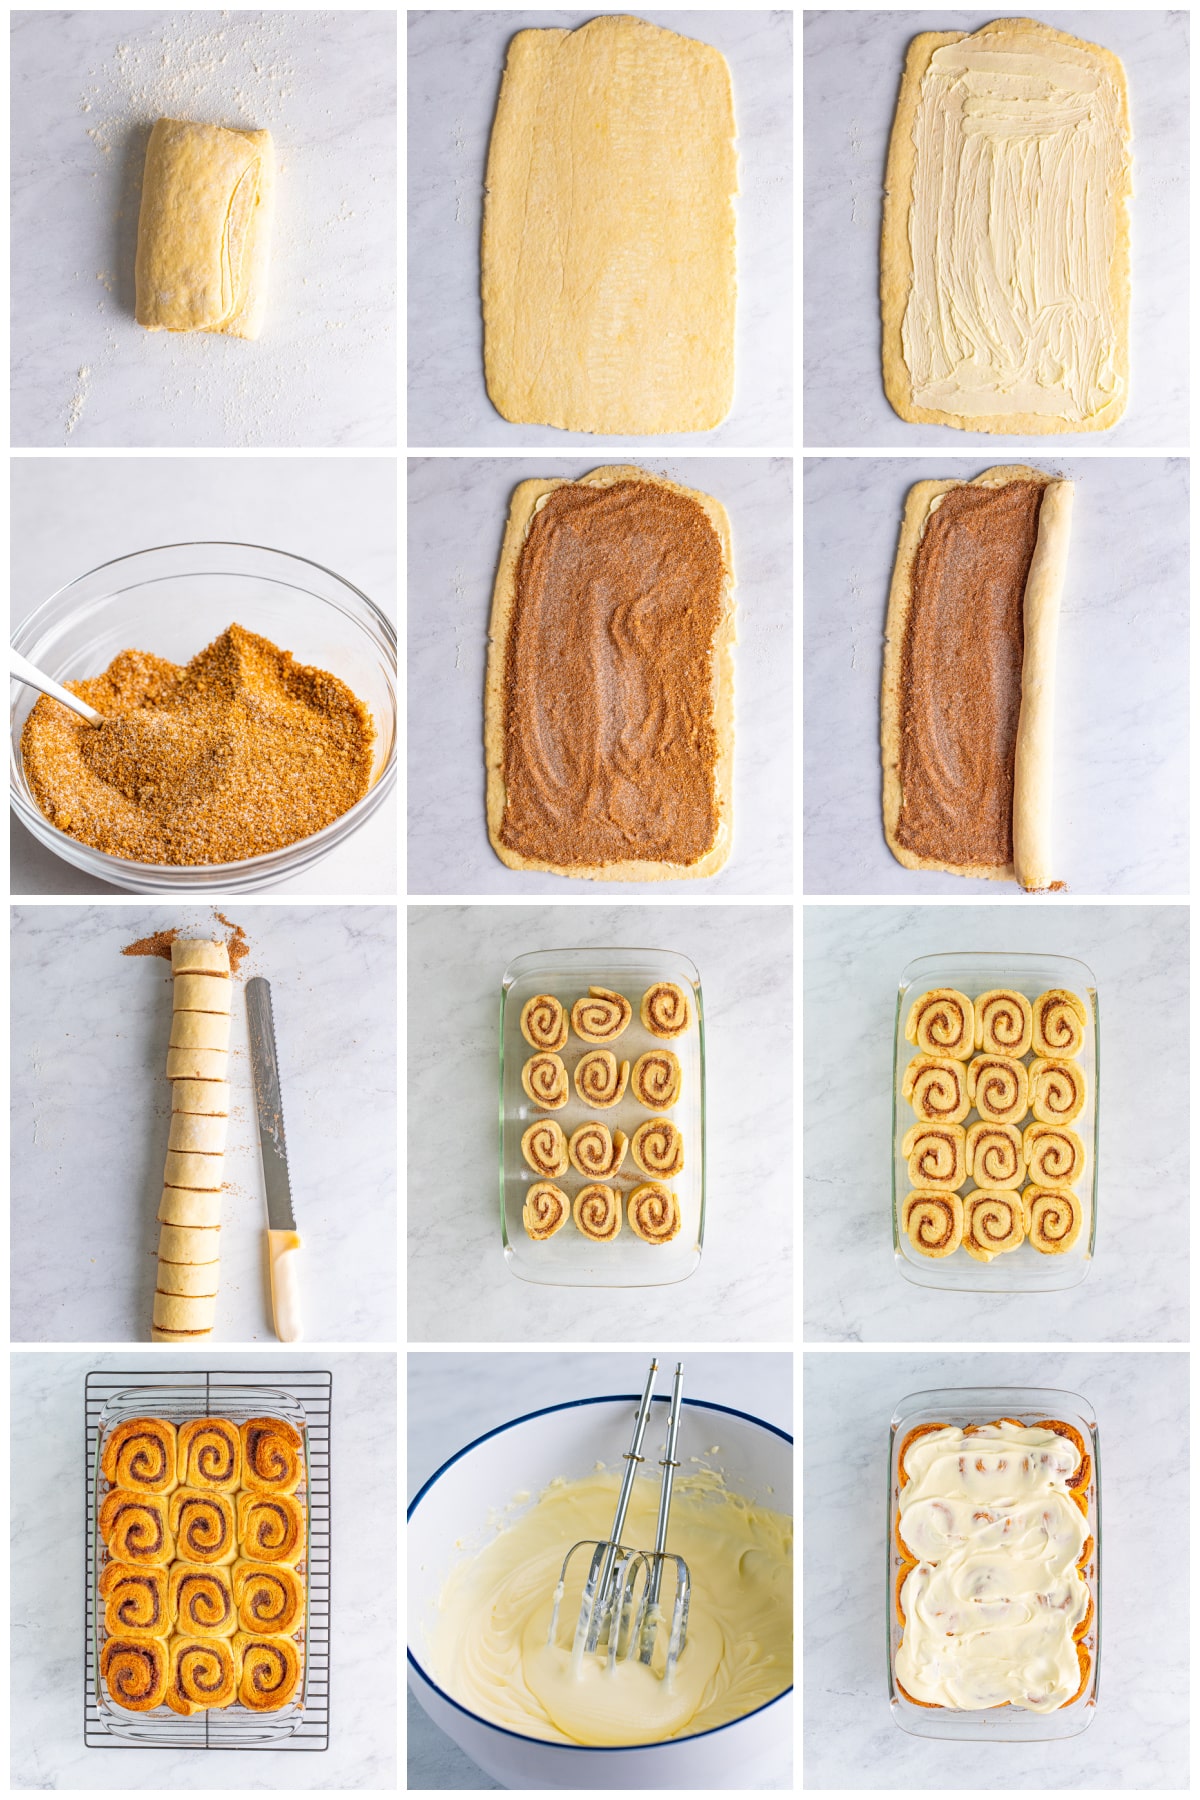 Step by step photos on how to assemble and bake Soft Cinnamon Rolls.